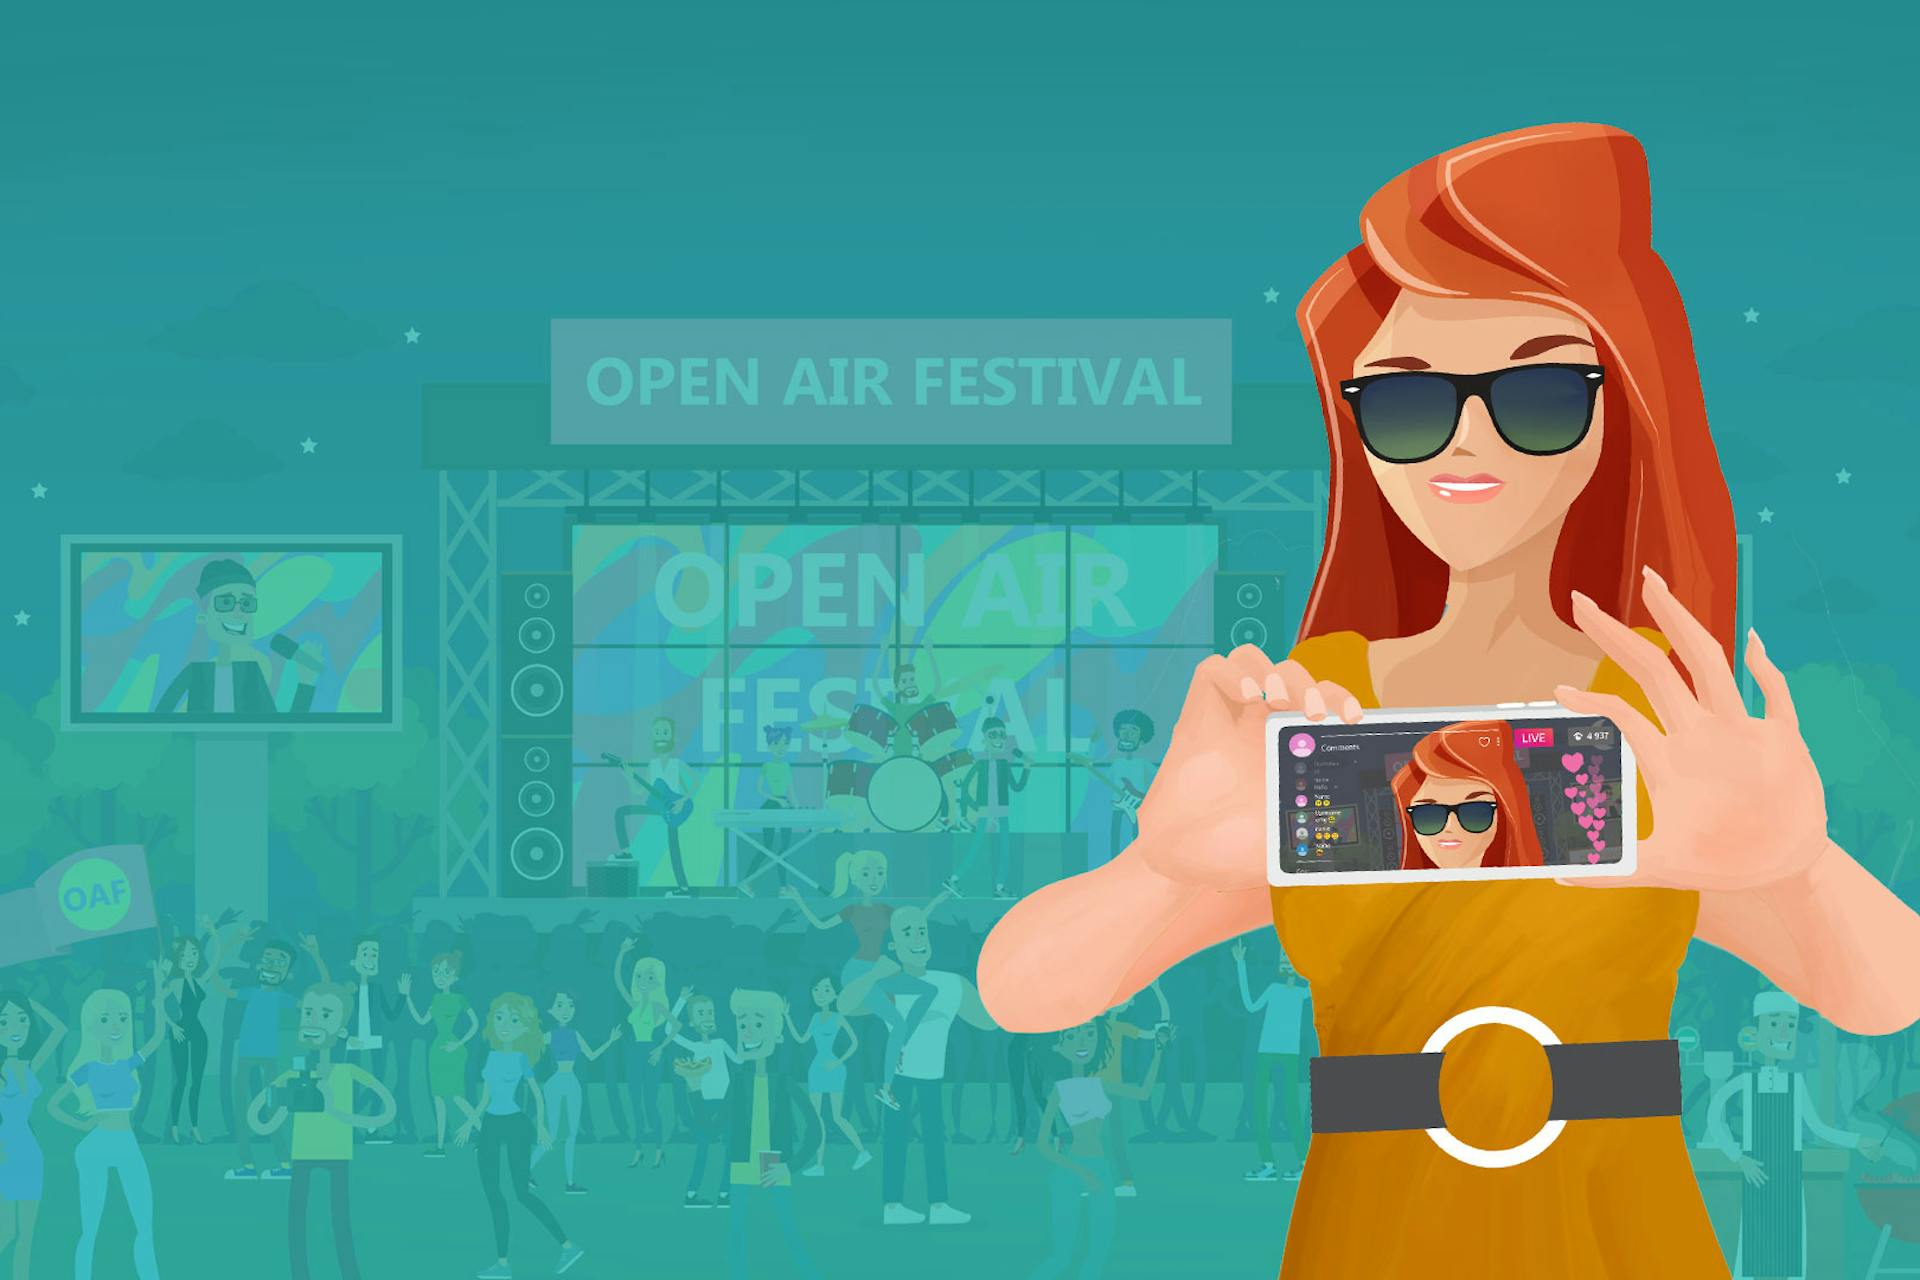 Illustration of a woman at a festival taking a selfie